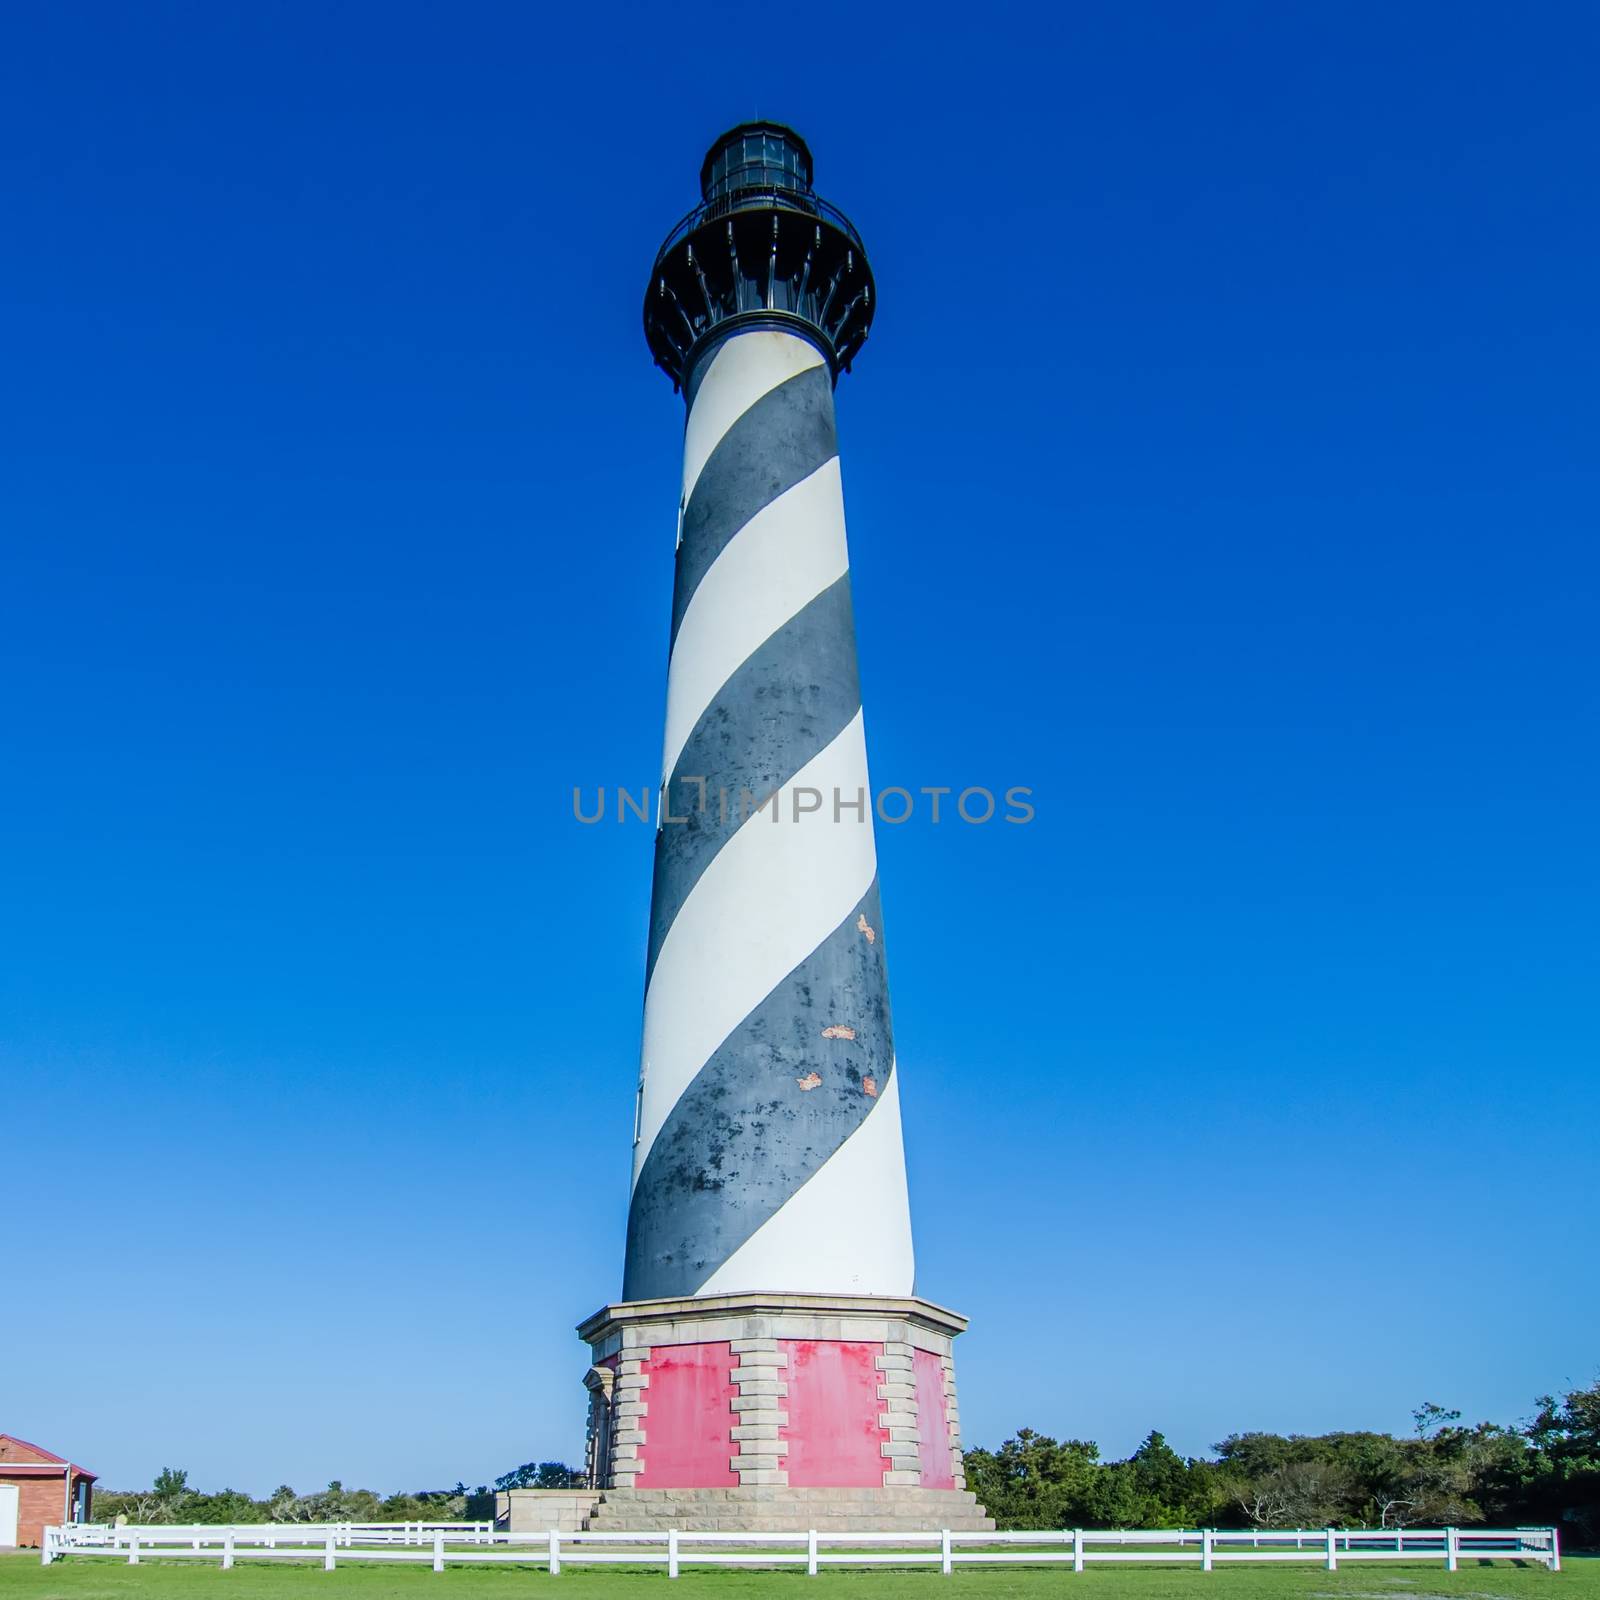 Diagonal black and white stripes mark the Cape Hatteras lighthou by digidreamgrafix